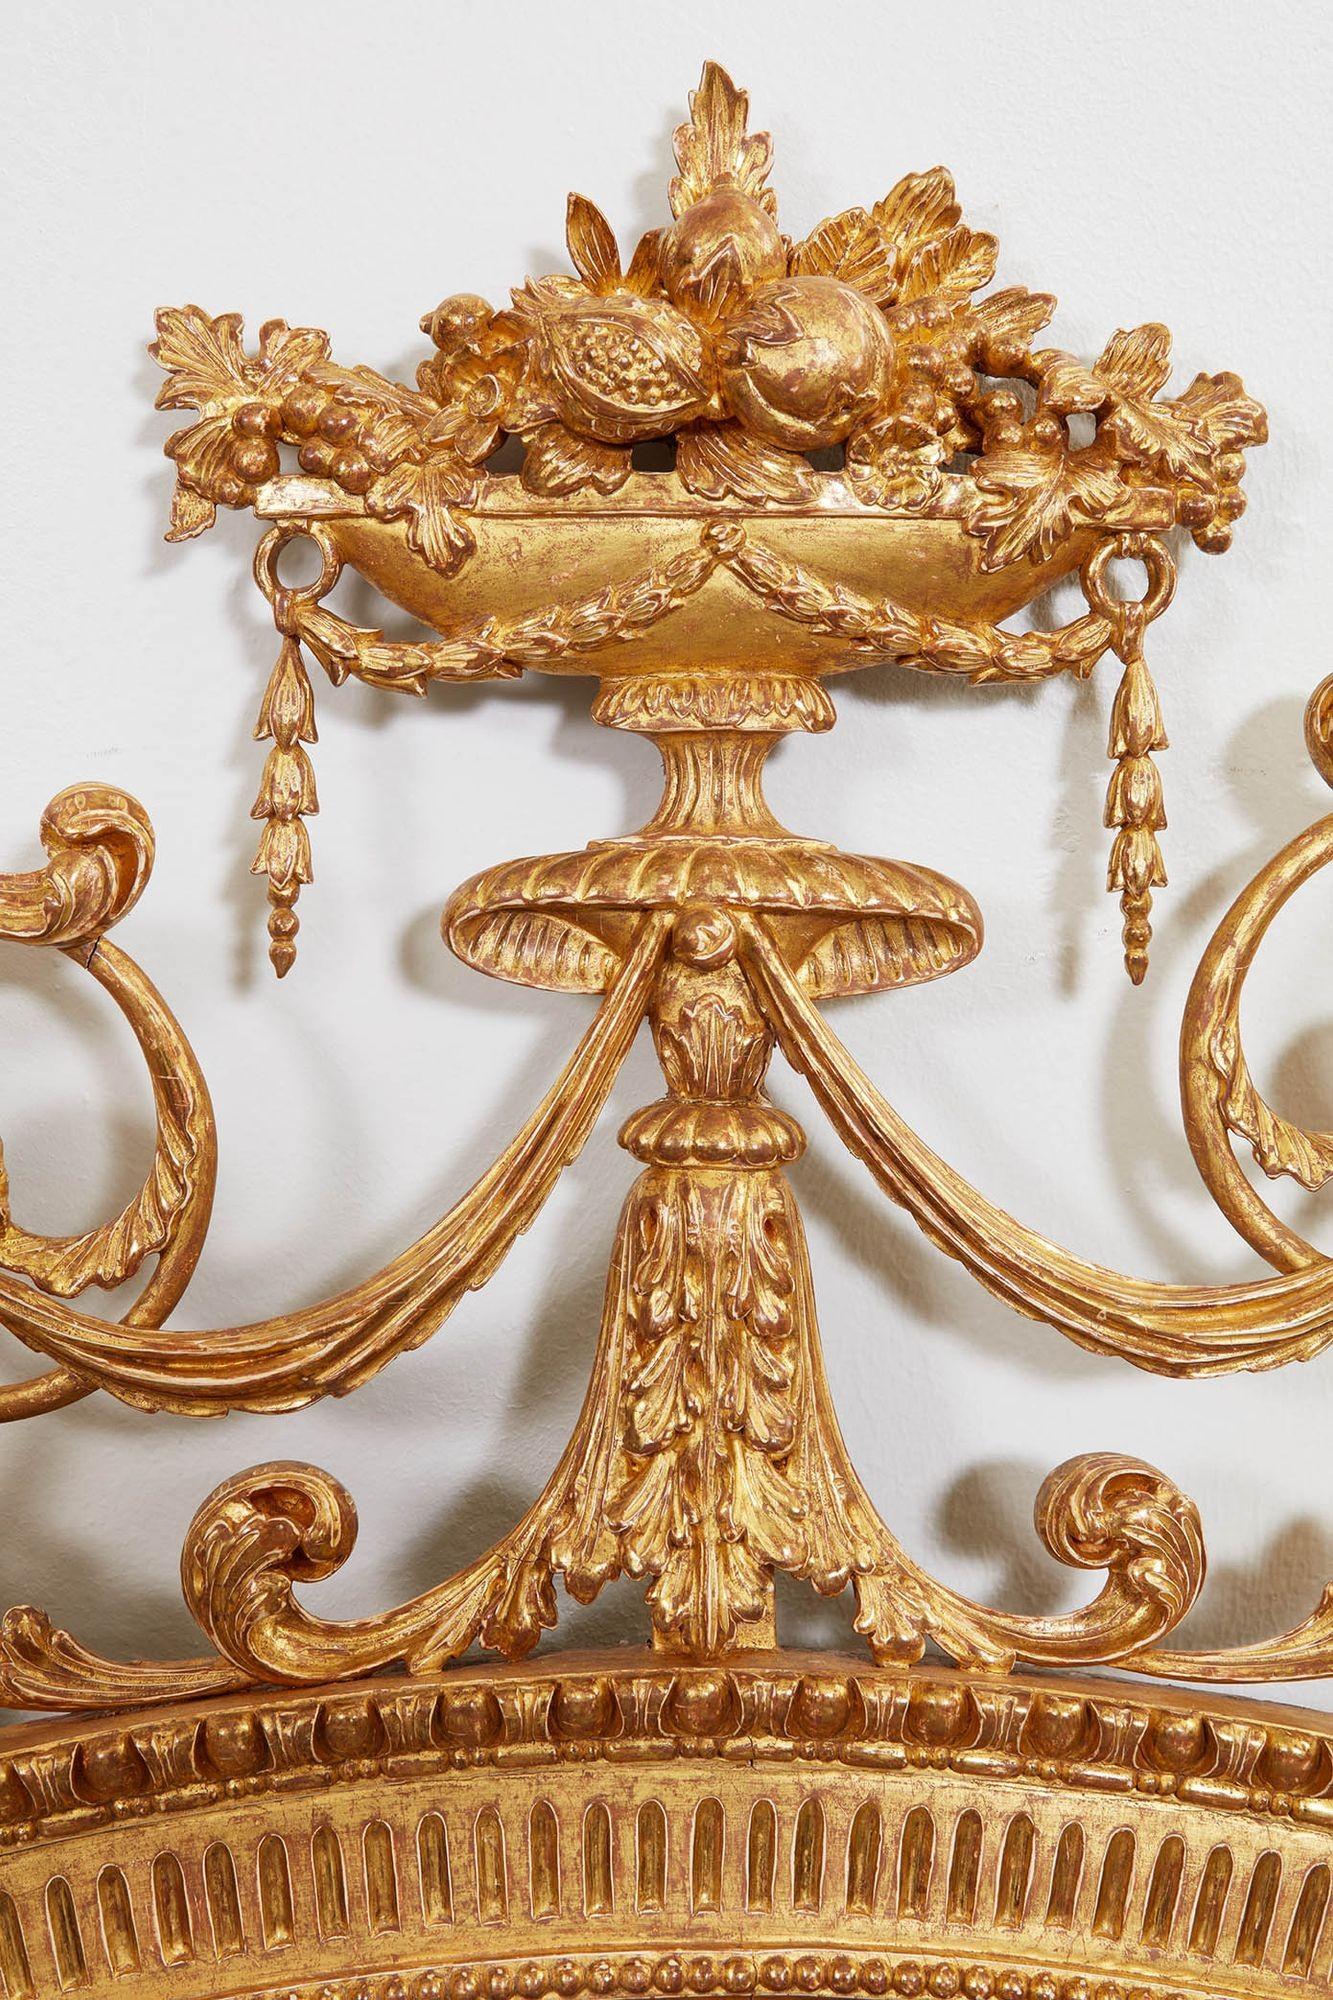 Very fine George III oval neoclassical mirror with flowering urn finial draped with bellflower garlands, over acanthus leaf carved base, having festoons and scrolls, over fluted oval frame with egg and dart and beaded carving, standing on lion paw